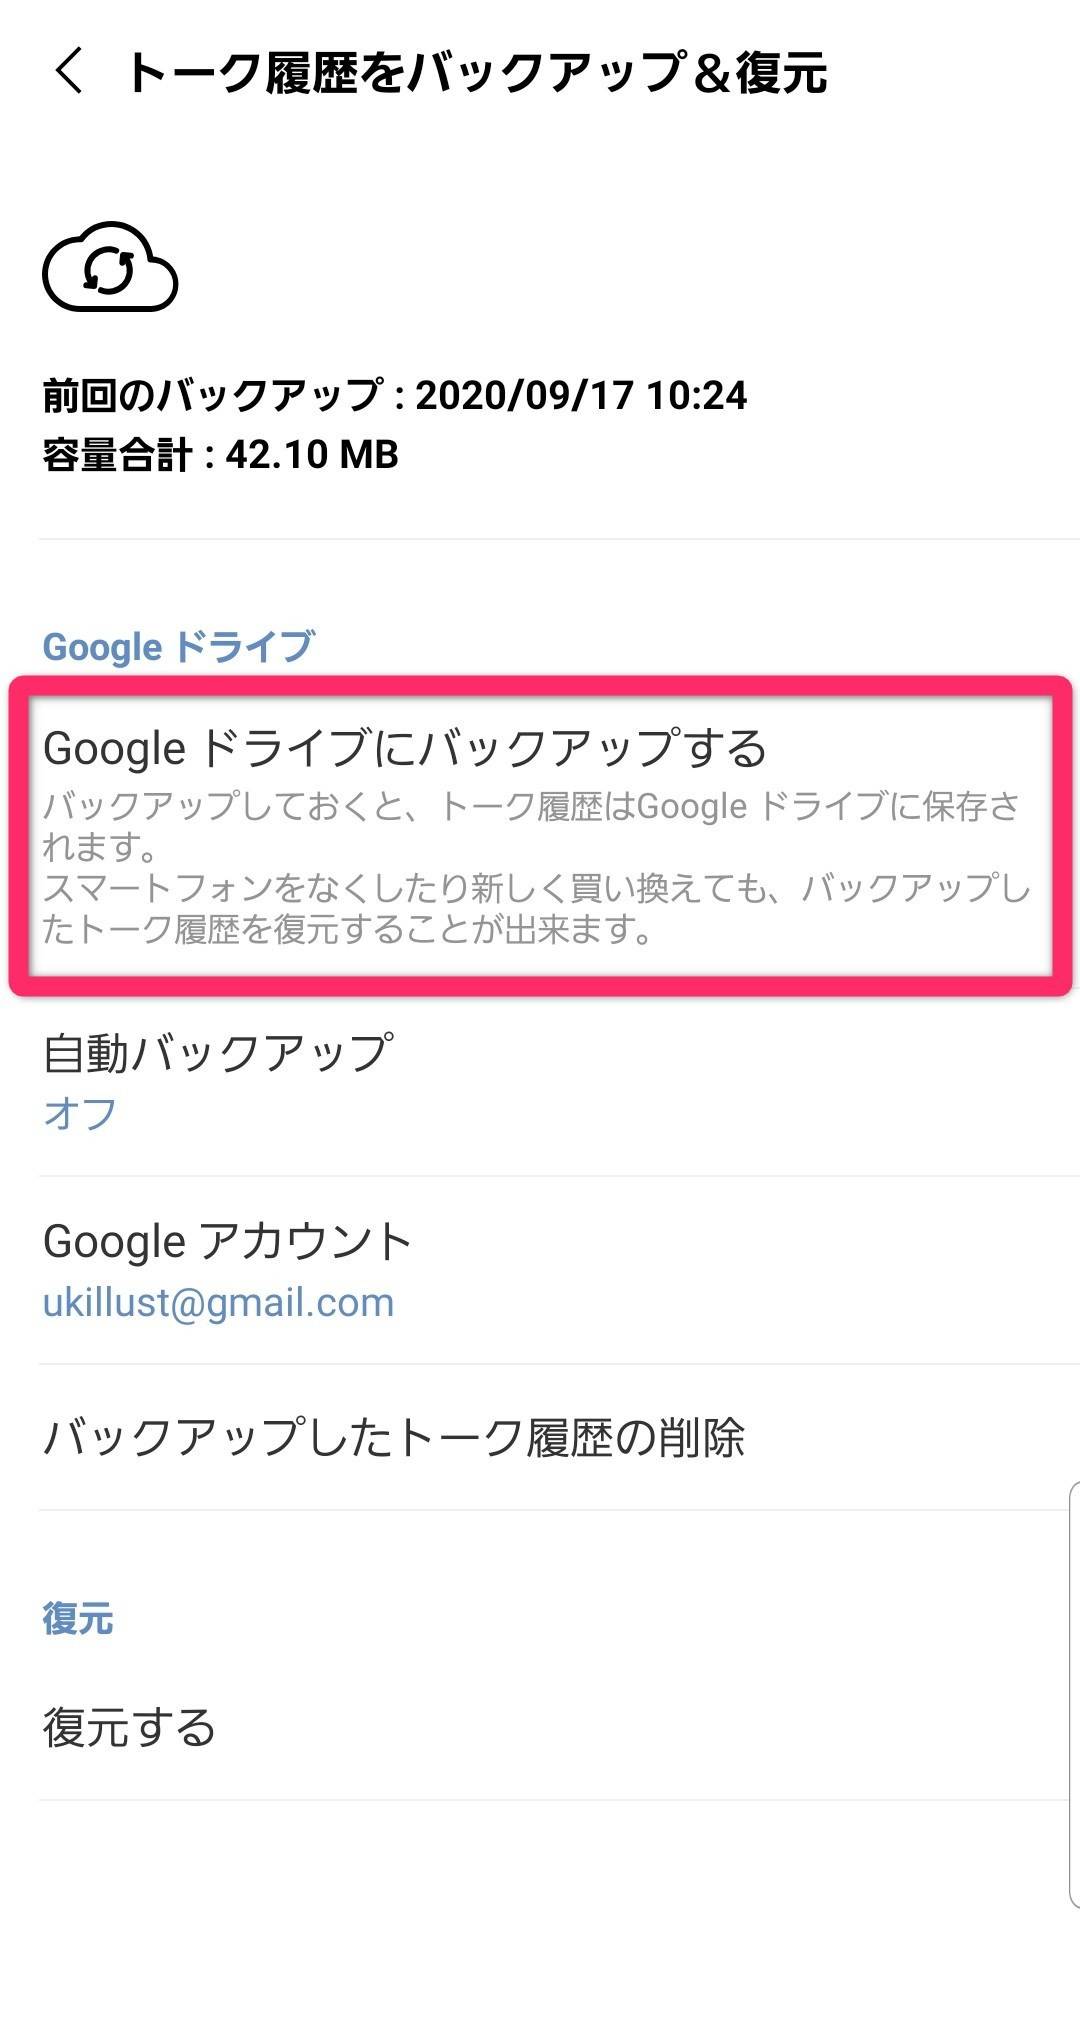 Android Lineトーク履歴のバックアップ 復元 機種変更時に引き継ぐ方法 21最新 Appliv Topics